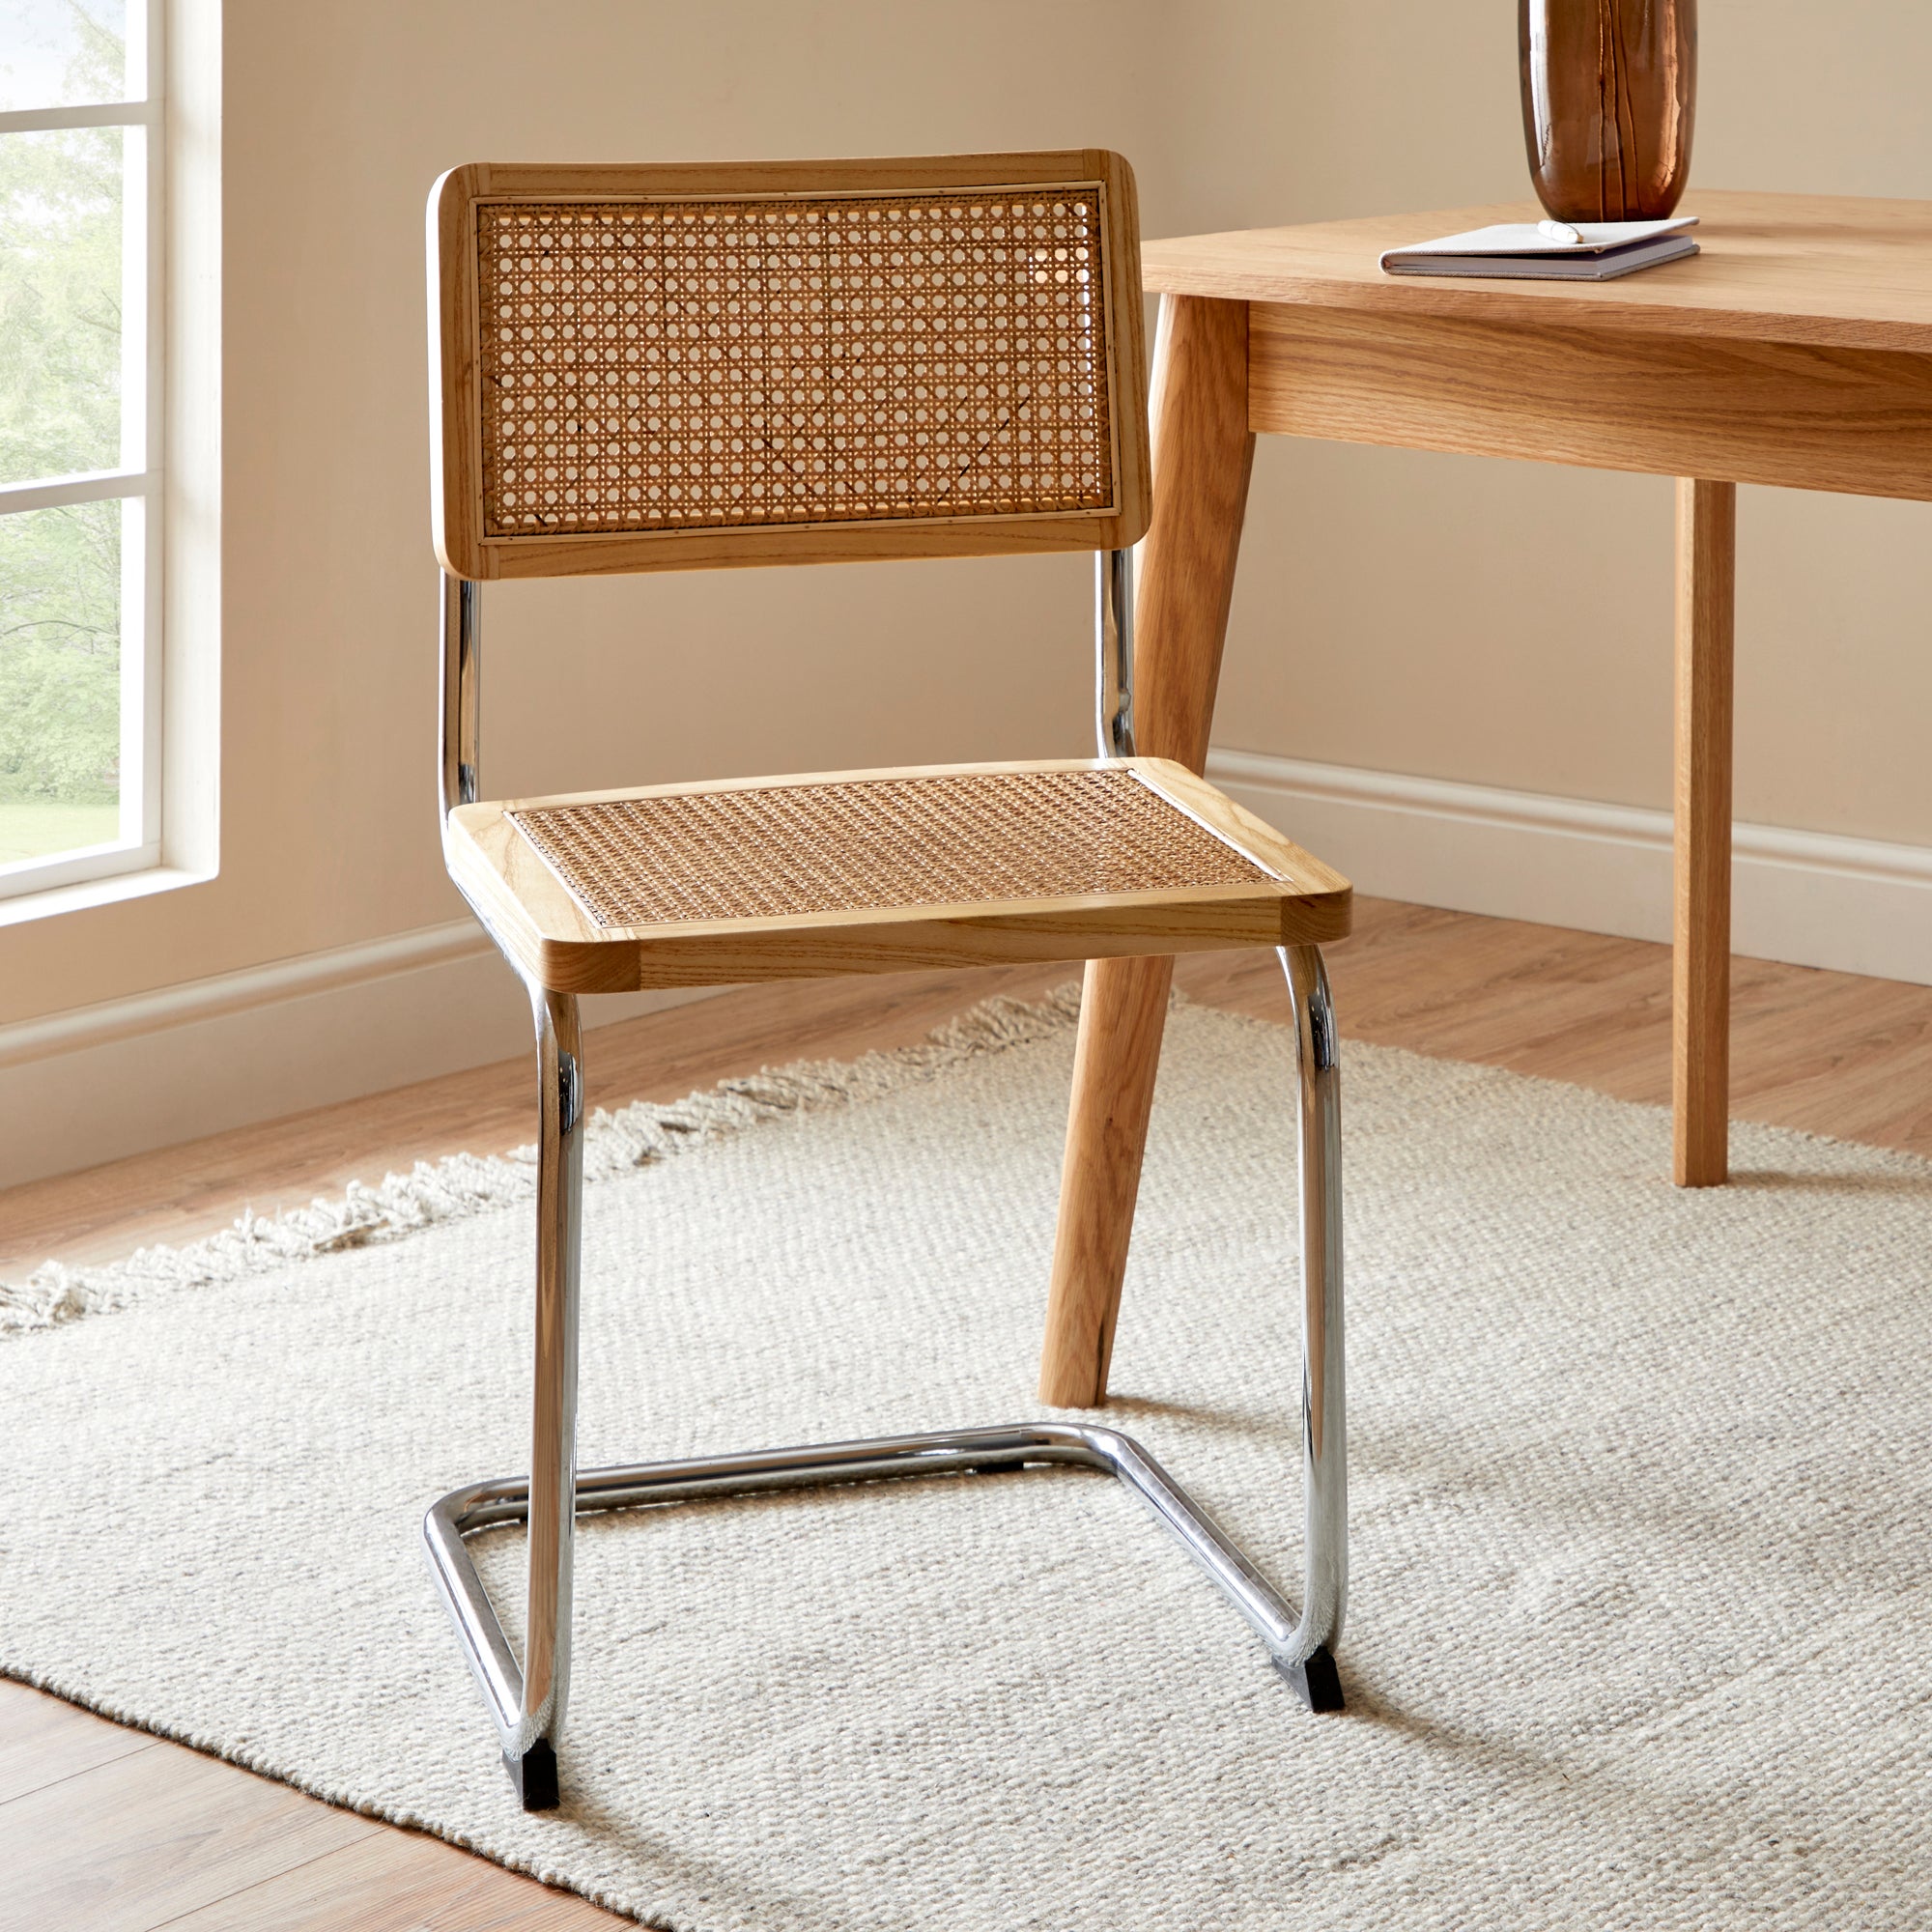 Naya Canteliver Dining Chair, Natural Cane